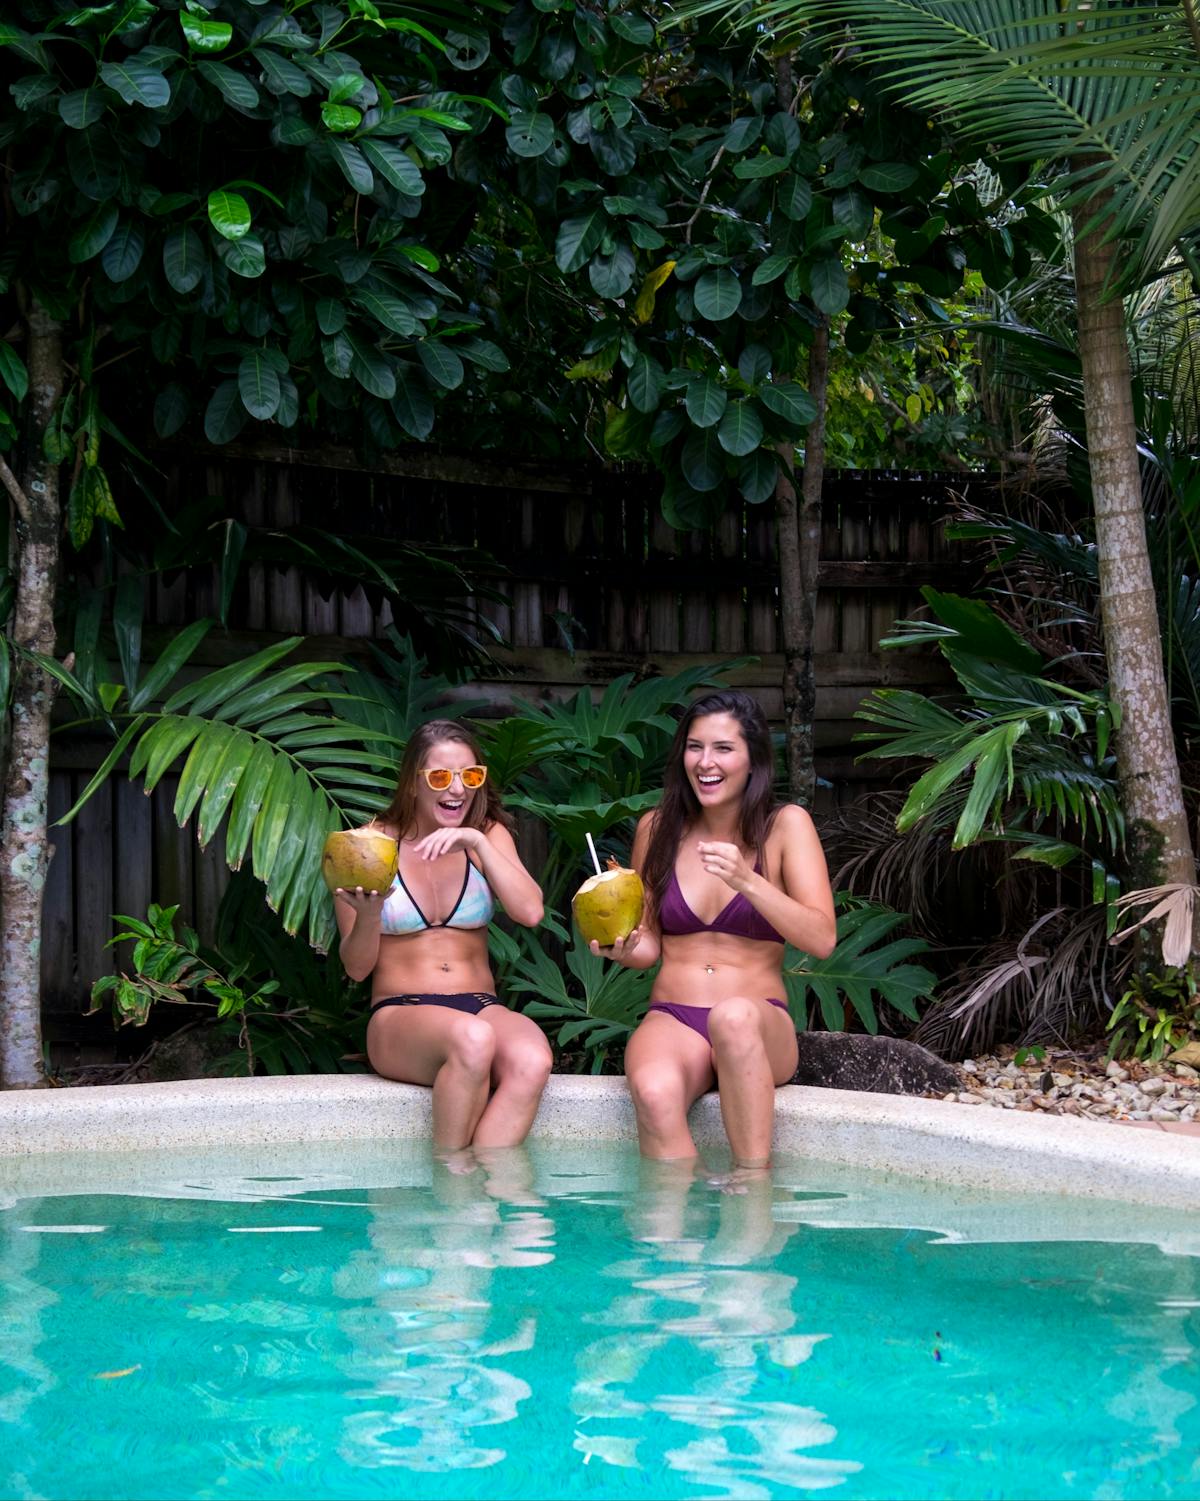 Sipping coconuts by the pool